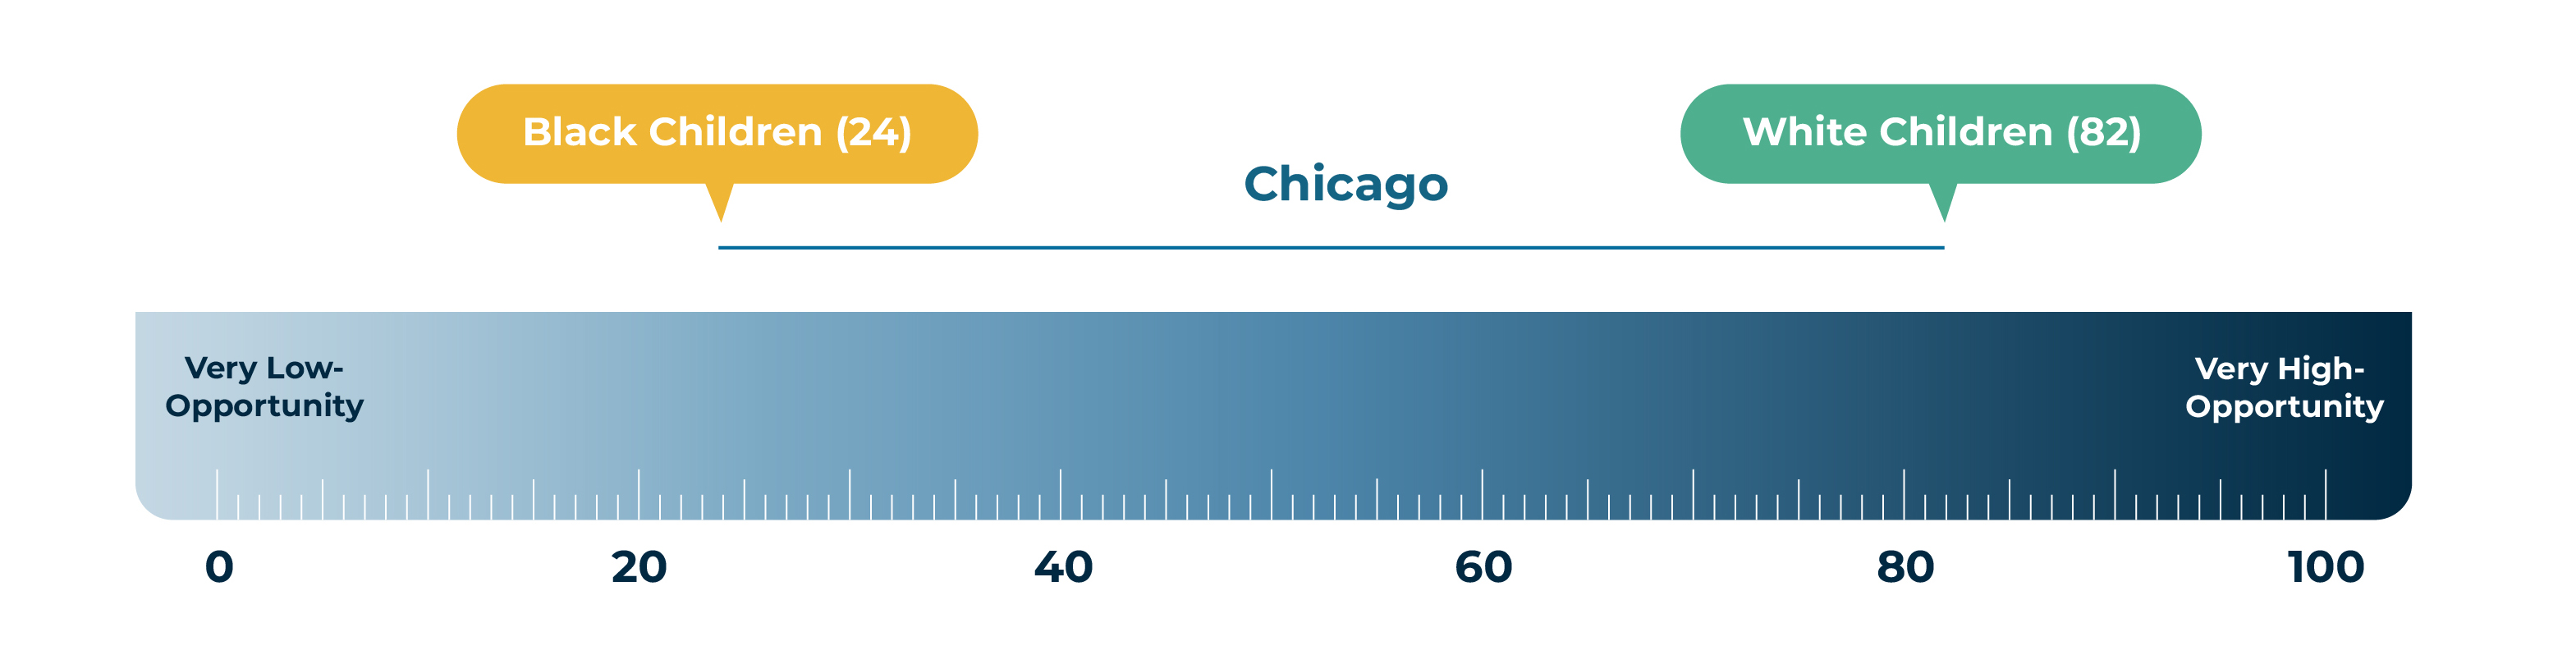 Graphic of a ruler showing the Opportunity Gap between Black and White children in Chicago